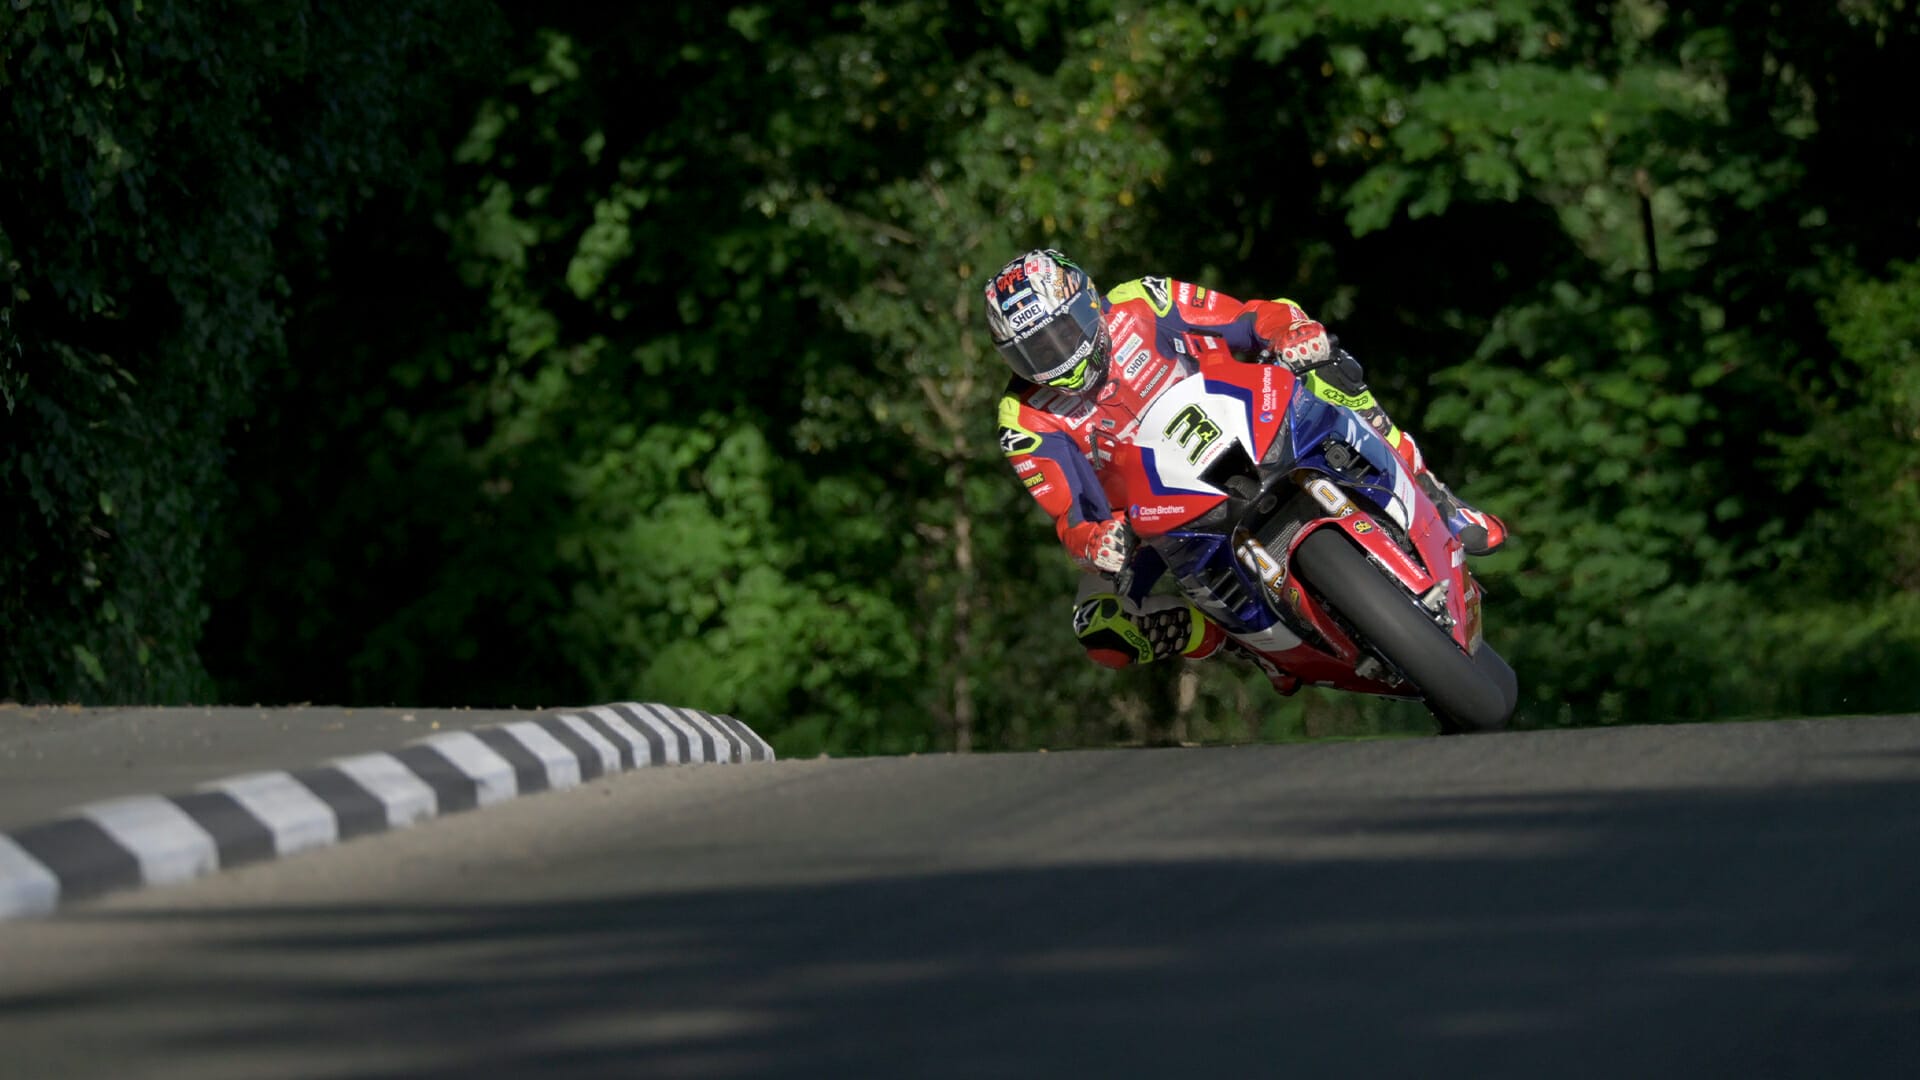 Isle of Man TT: Race fever rises with speeds over 133 mph